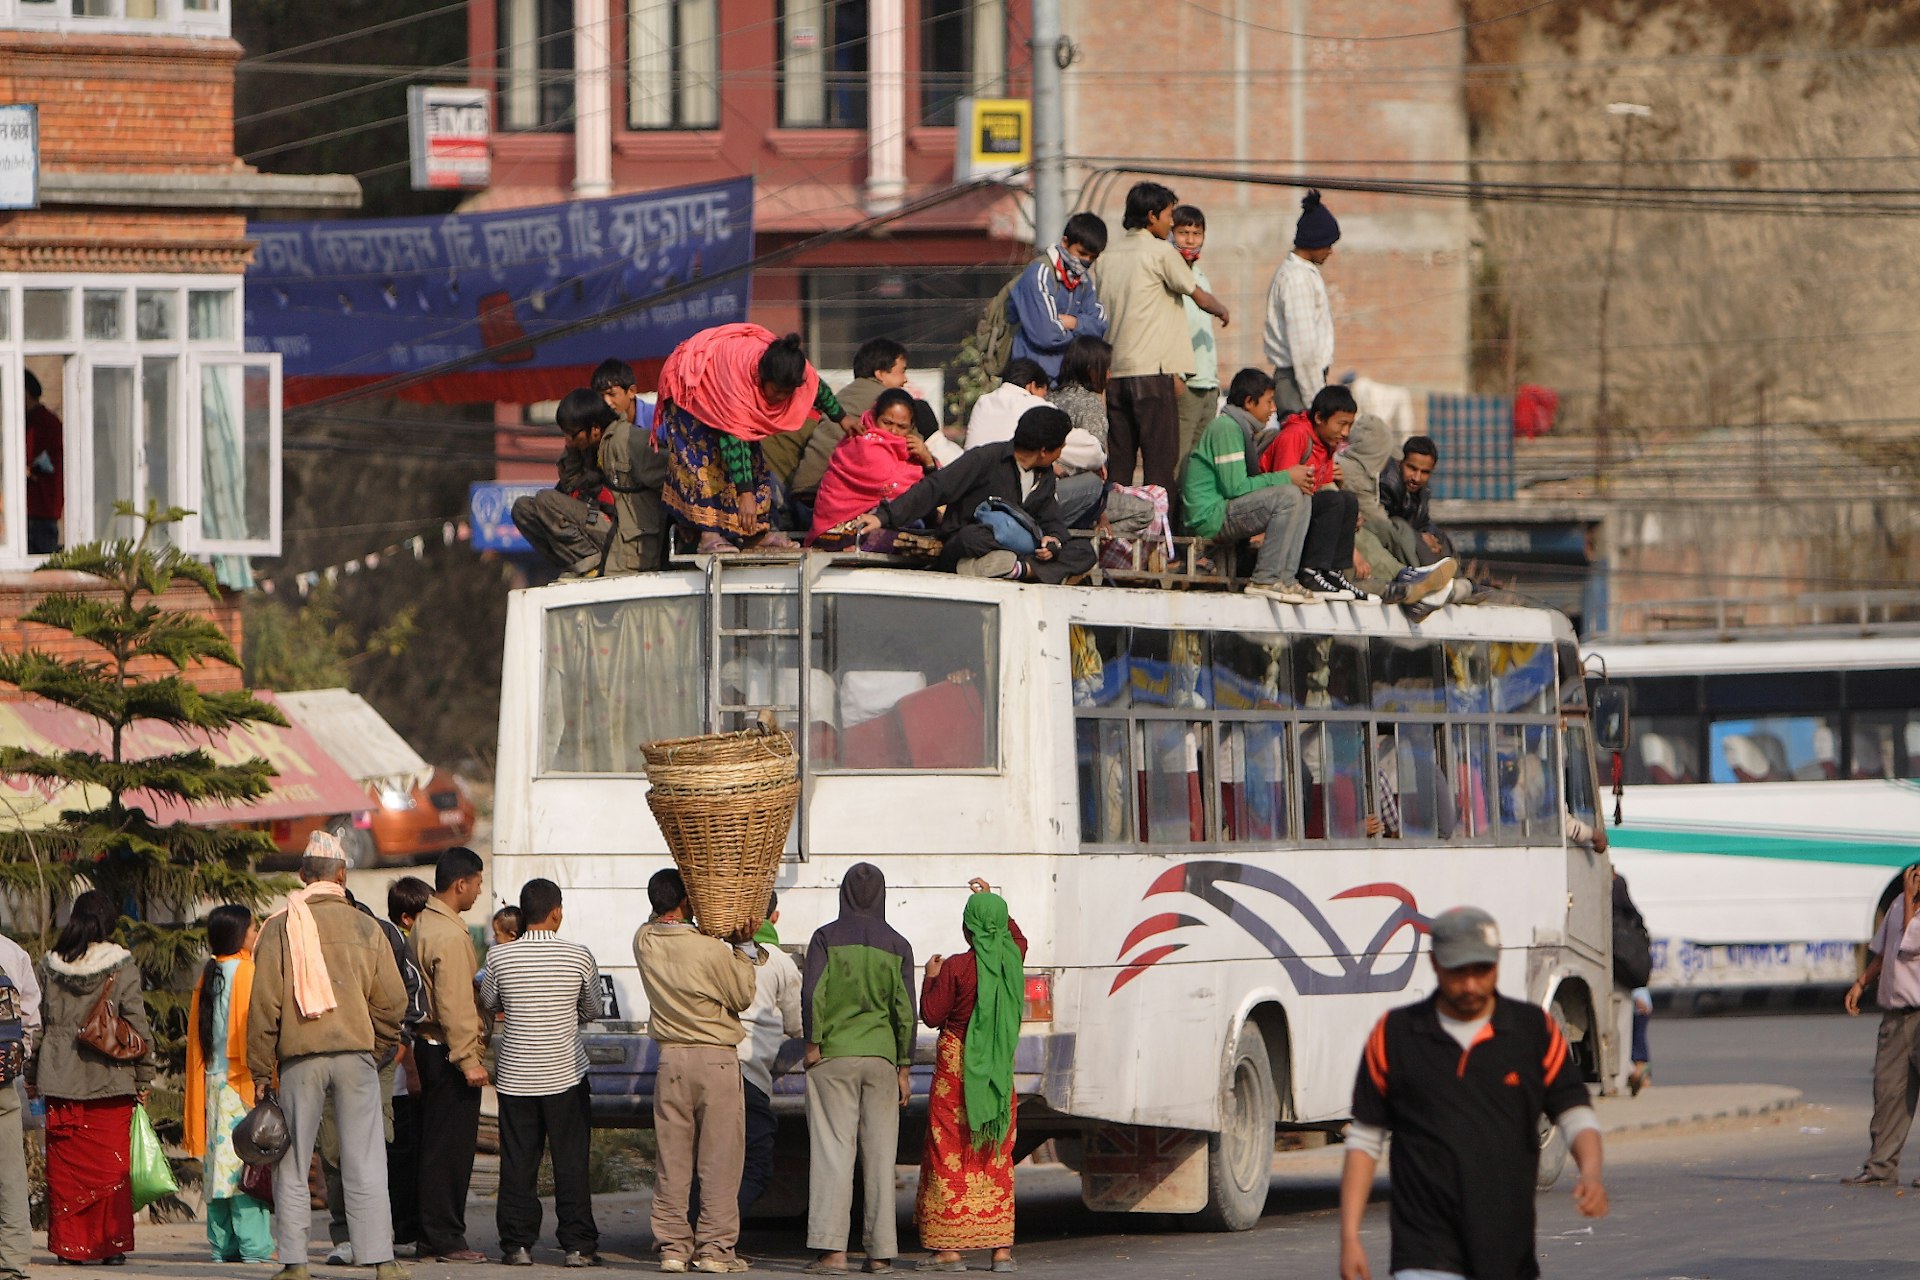 Passengers loading goods onto a local bus in Kathmandu. Image by Department of Foreign Affairs and Trade / CC by 2.0